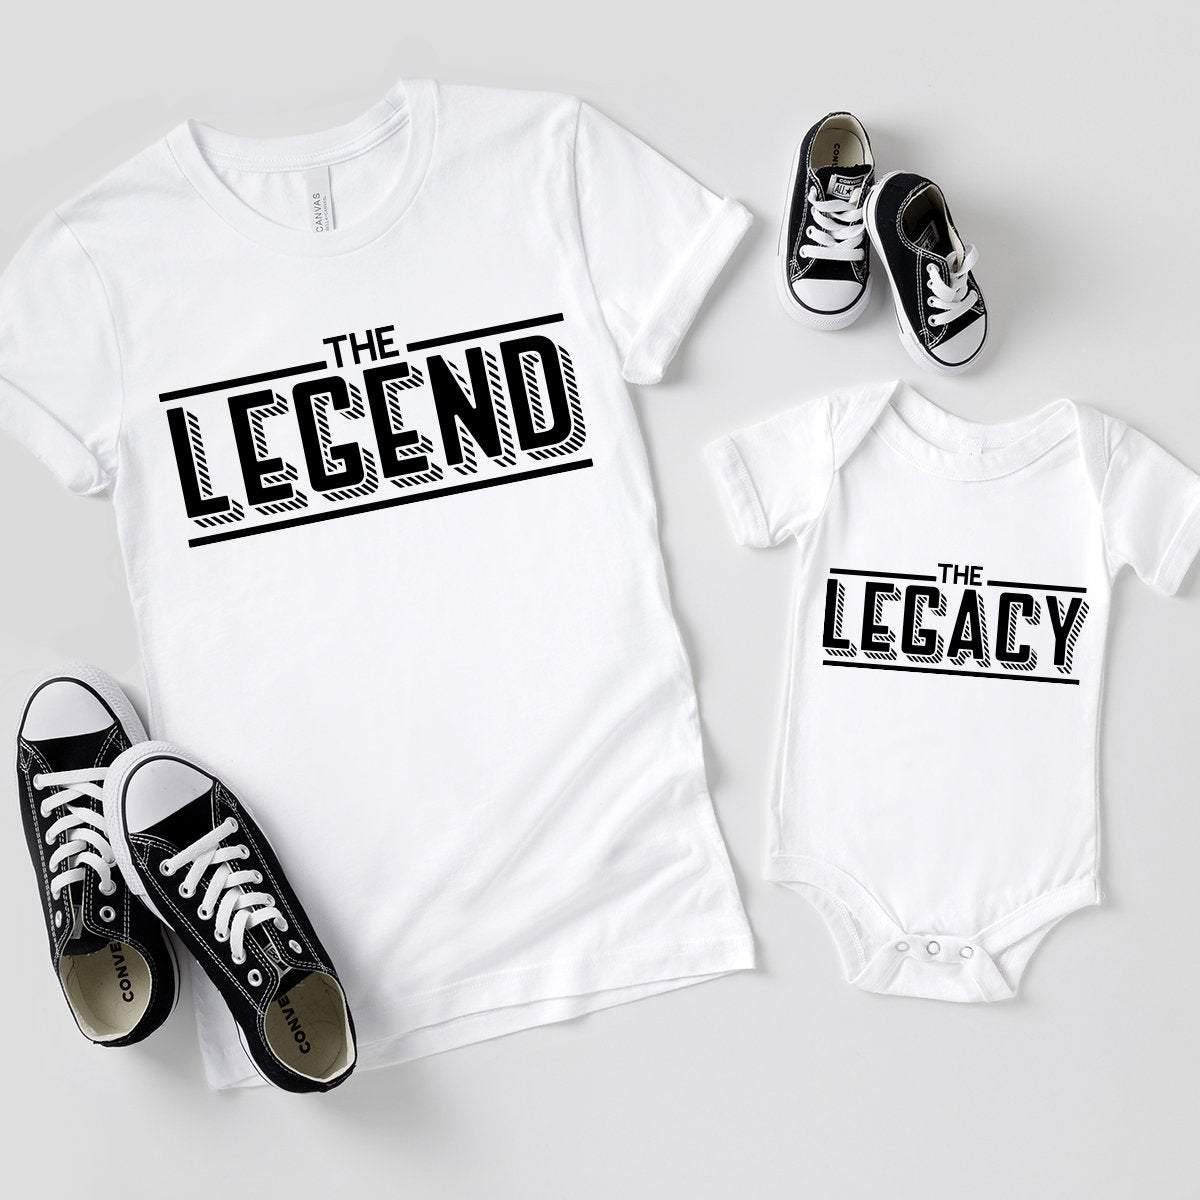 Dad and Son Matching Shirt, Daddy and Son Shirt, Legend Legacy Shirt, Funny Family Shirt, Fathers Day Matching Shirt, Dad and Son T-Shirt